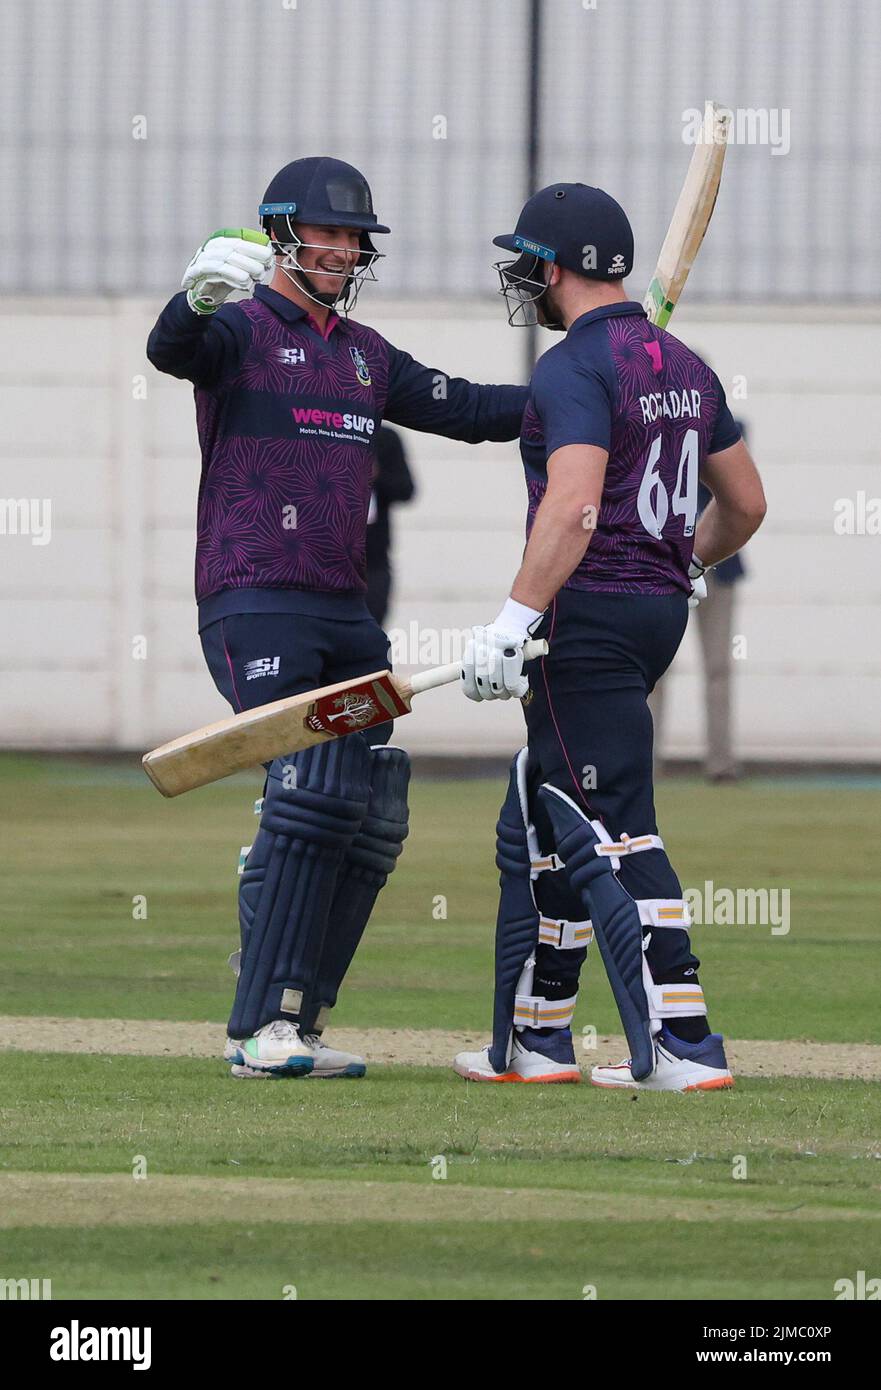 The Green, North Down CC, Comber, County Down.Northern Ireland.  05 Aug 2022. The Gallagher Challenge Cup Final - CIYMS v CSNI (light blue/navy). CIYMS won the cup with a ten wicket victory. Batters Chris Dougerty (left) and Ross Adair celebrate their win. Credit: David Hunter/Alamy Live News. Stock Photo